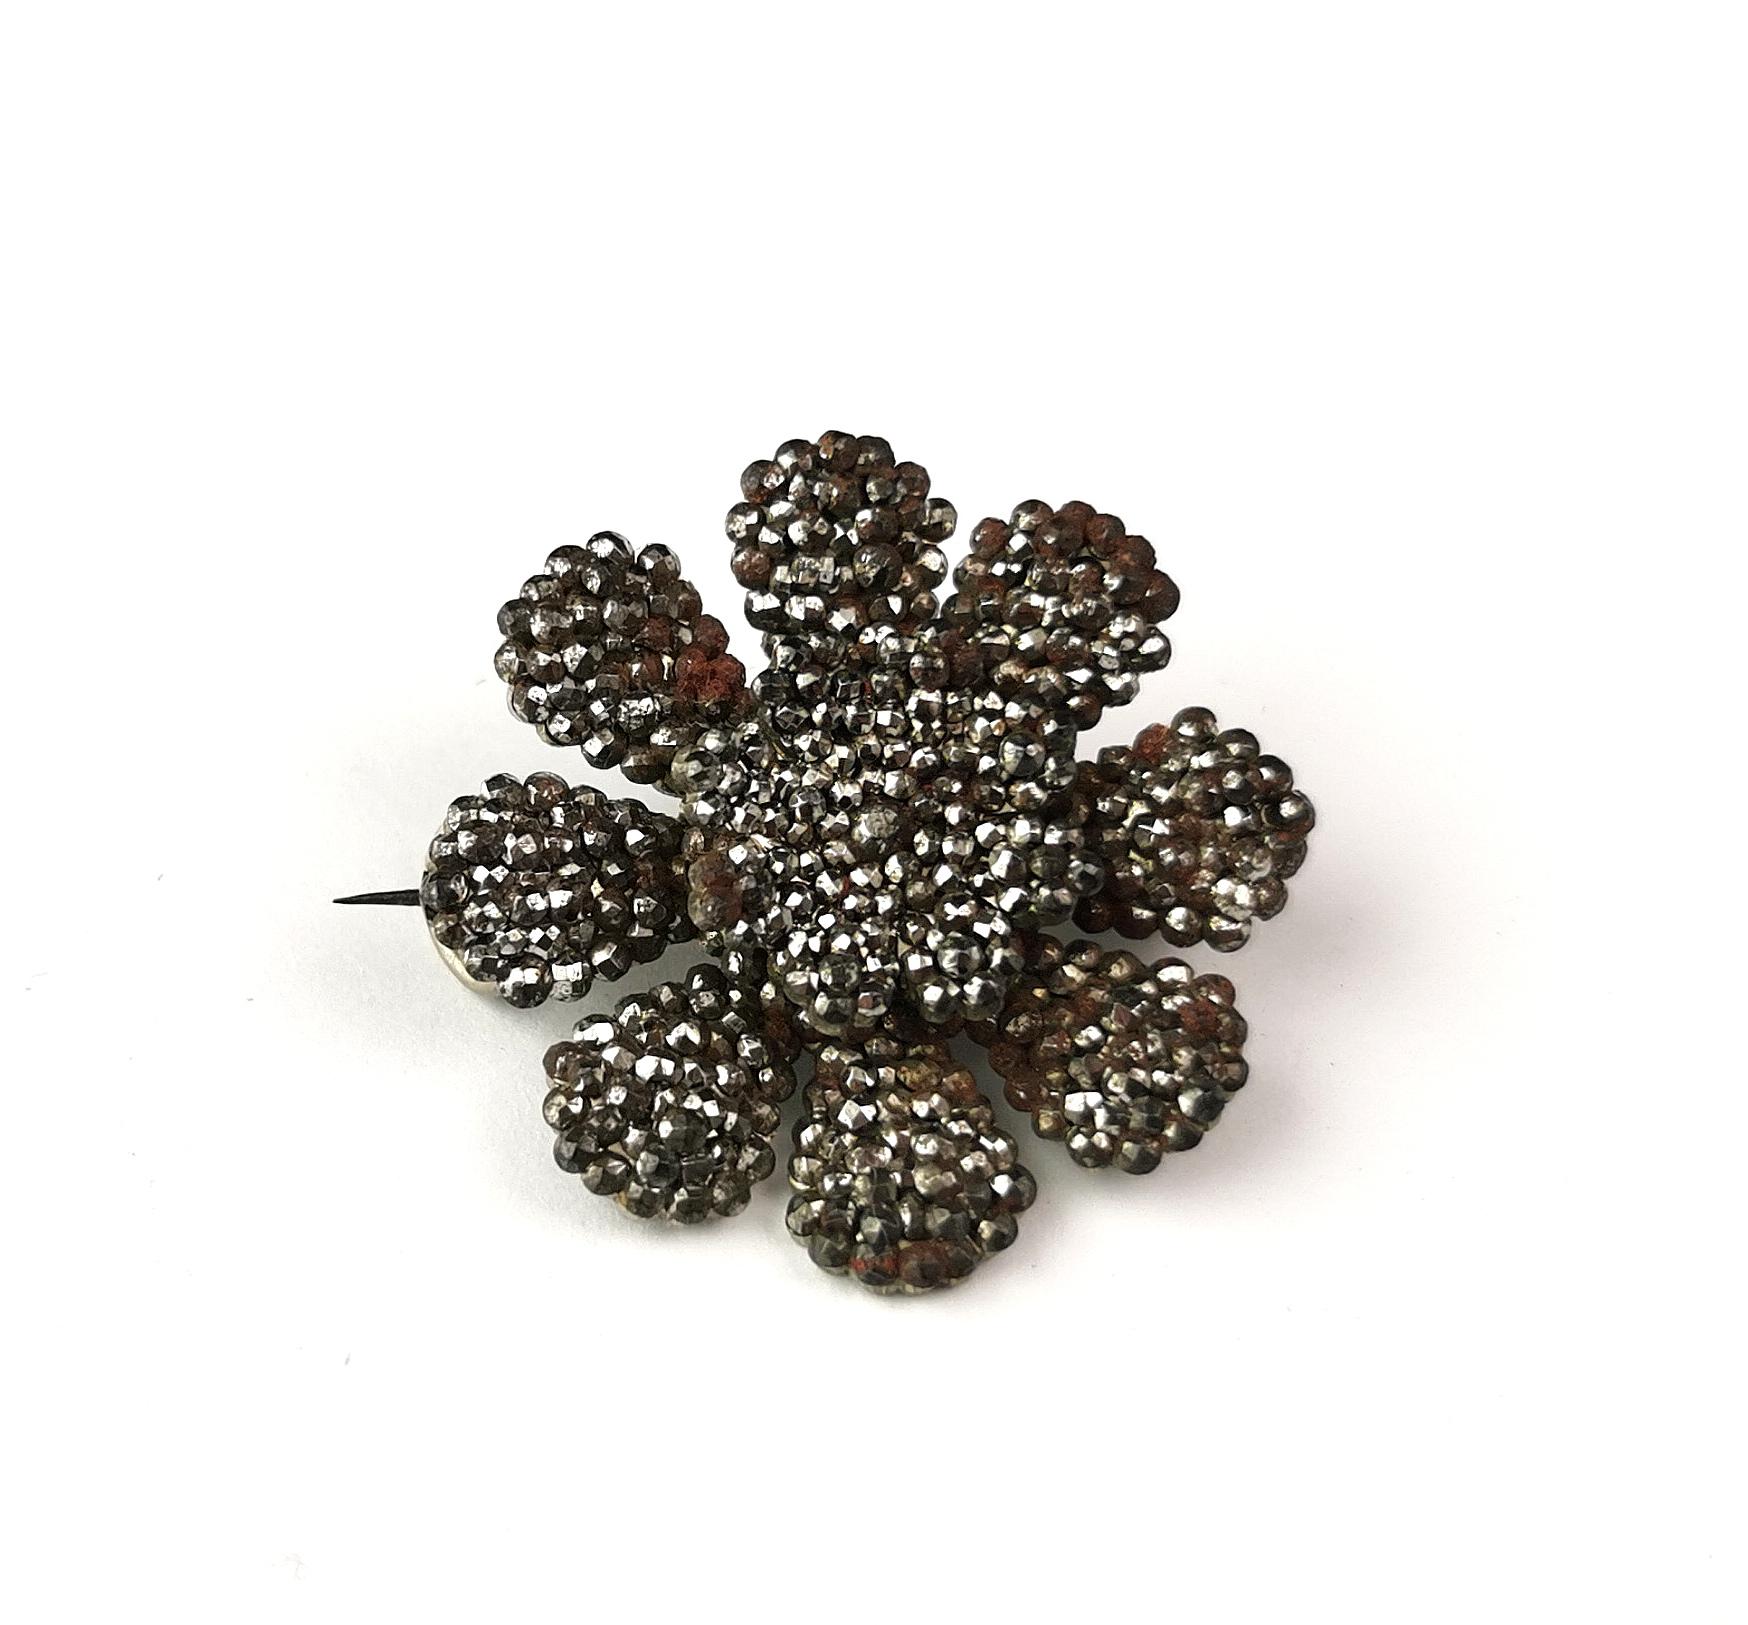 A beautiful antique late Georgian era cut steel flower brooch.

This is a circular floral brooch with carefully hand crafted individual petals all made from tiny cut steel cabochons, the brooch has a 3d effect to it with the layered petals.

It has